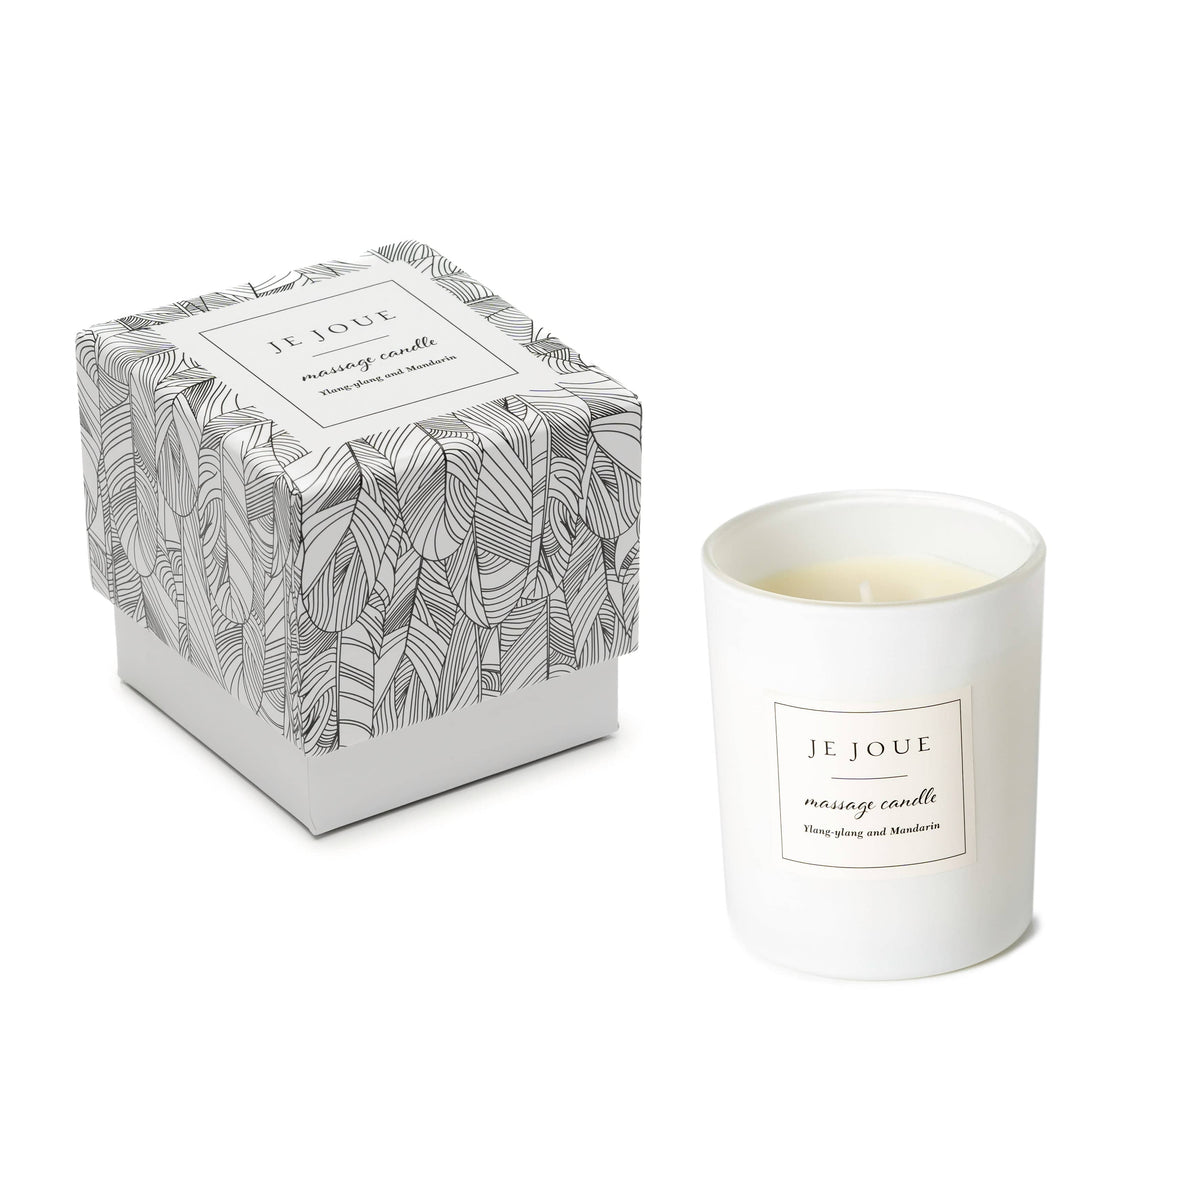 Luxury Massage Candle - Ylang Ylang & Mandarin Lubes & Lotions Je Joue   